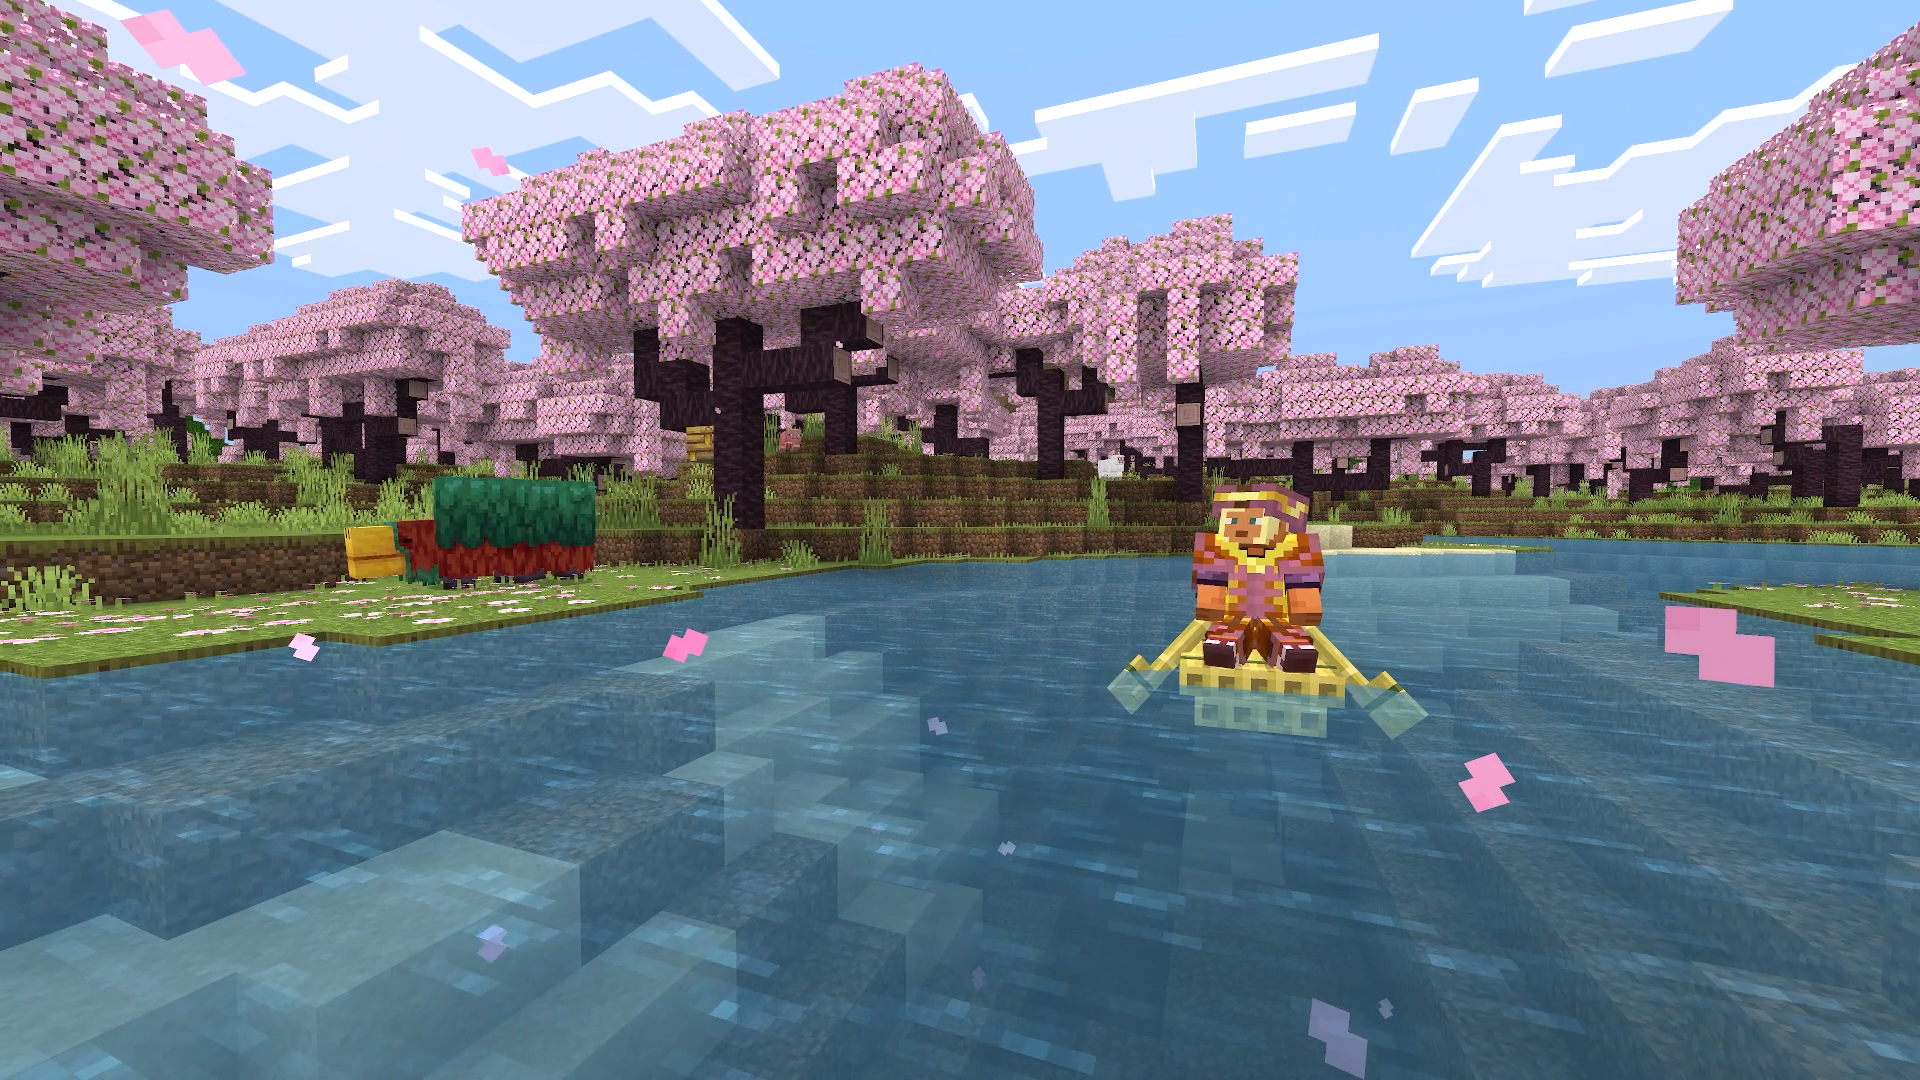 Minecraft character in armor paddles a boat in a pixelated game world with blooming trees